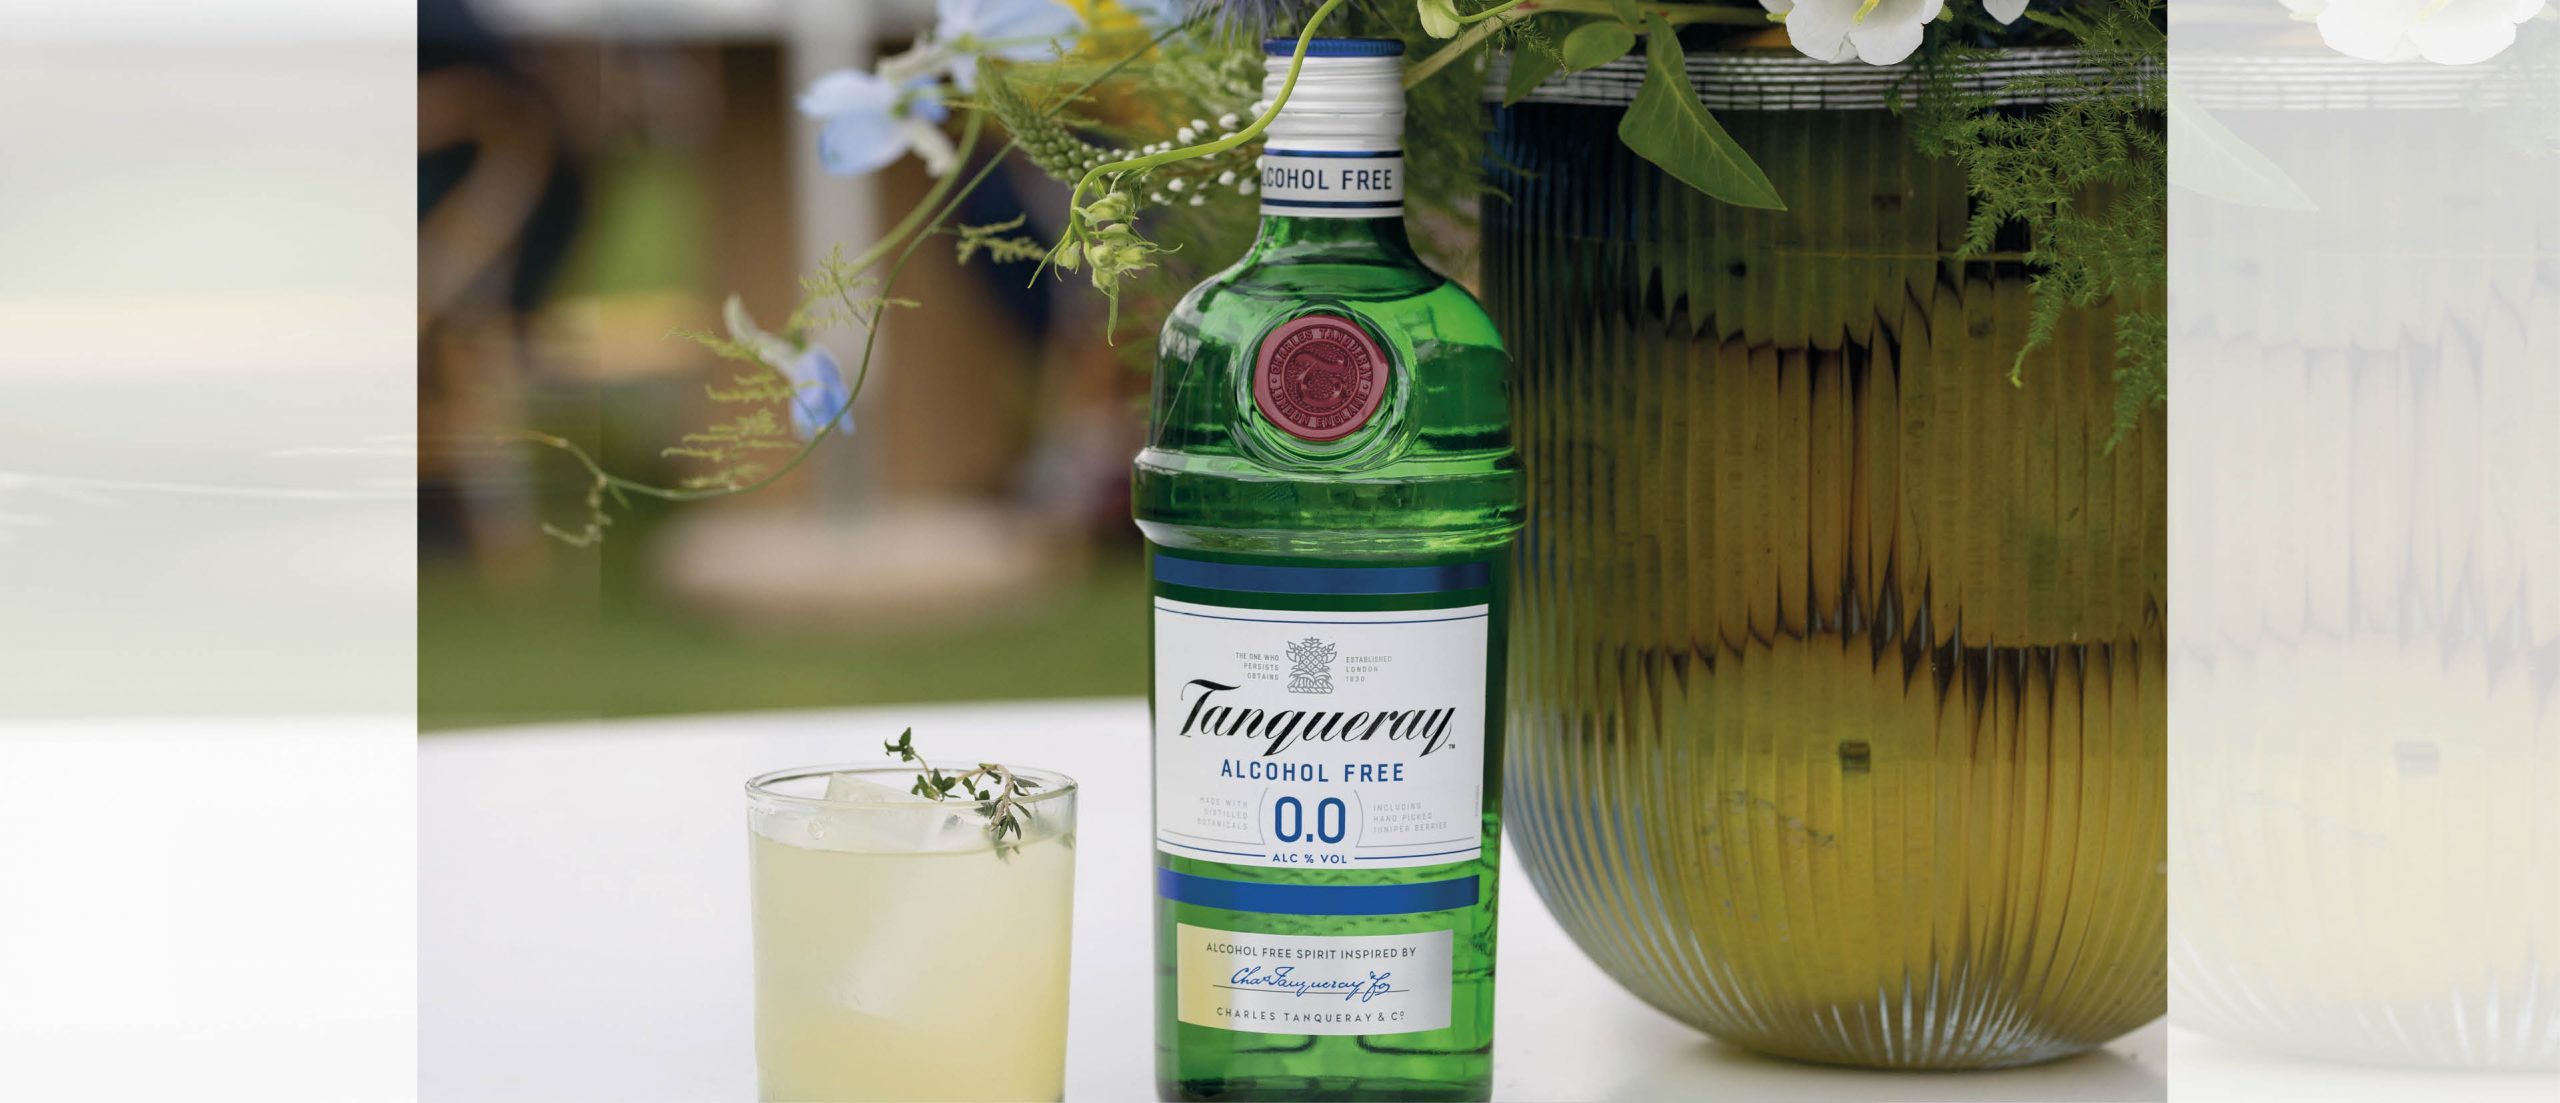 Get Worry-free, alcohol-free Tanqueray Magazine - It